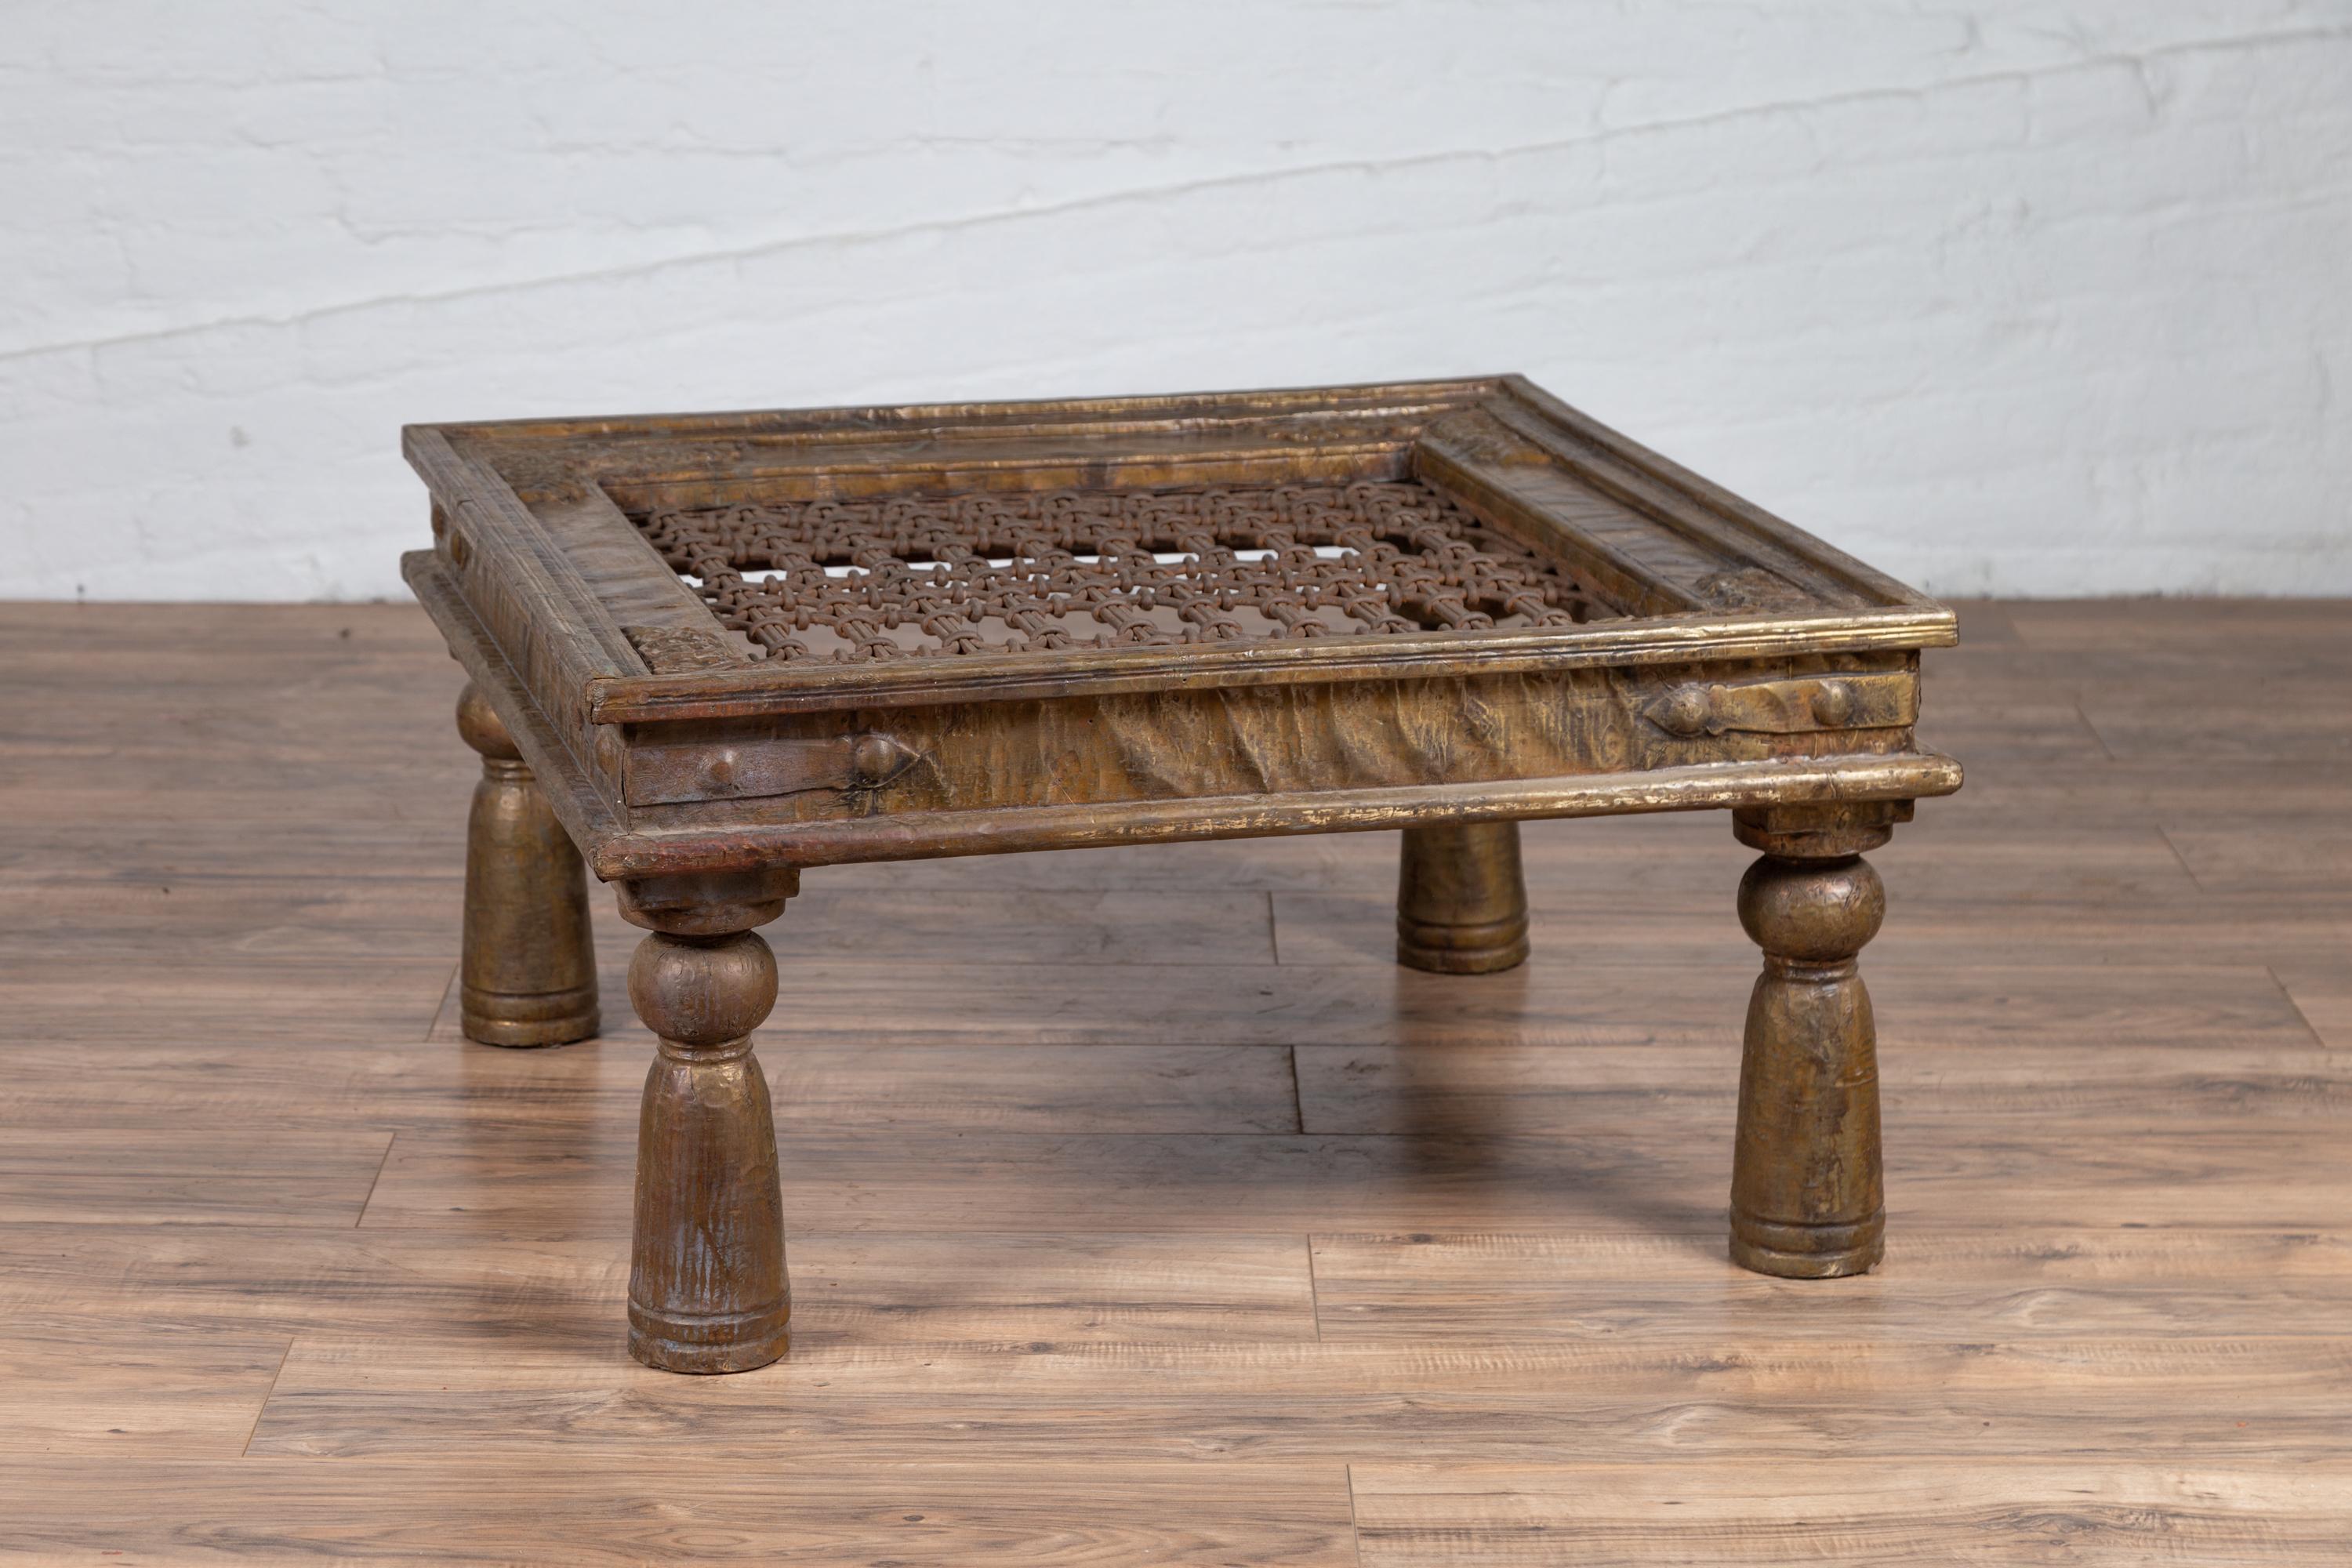 Antique Indian Brass Window Grate Coffee Table with Iron Geometric Design For Sale 2